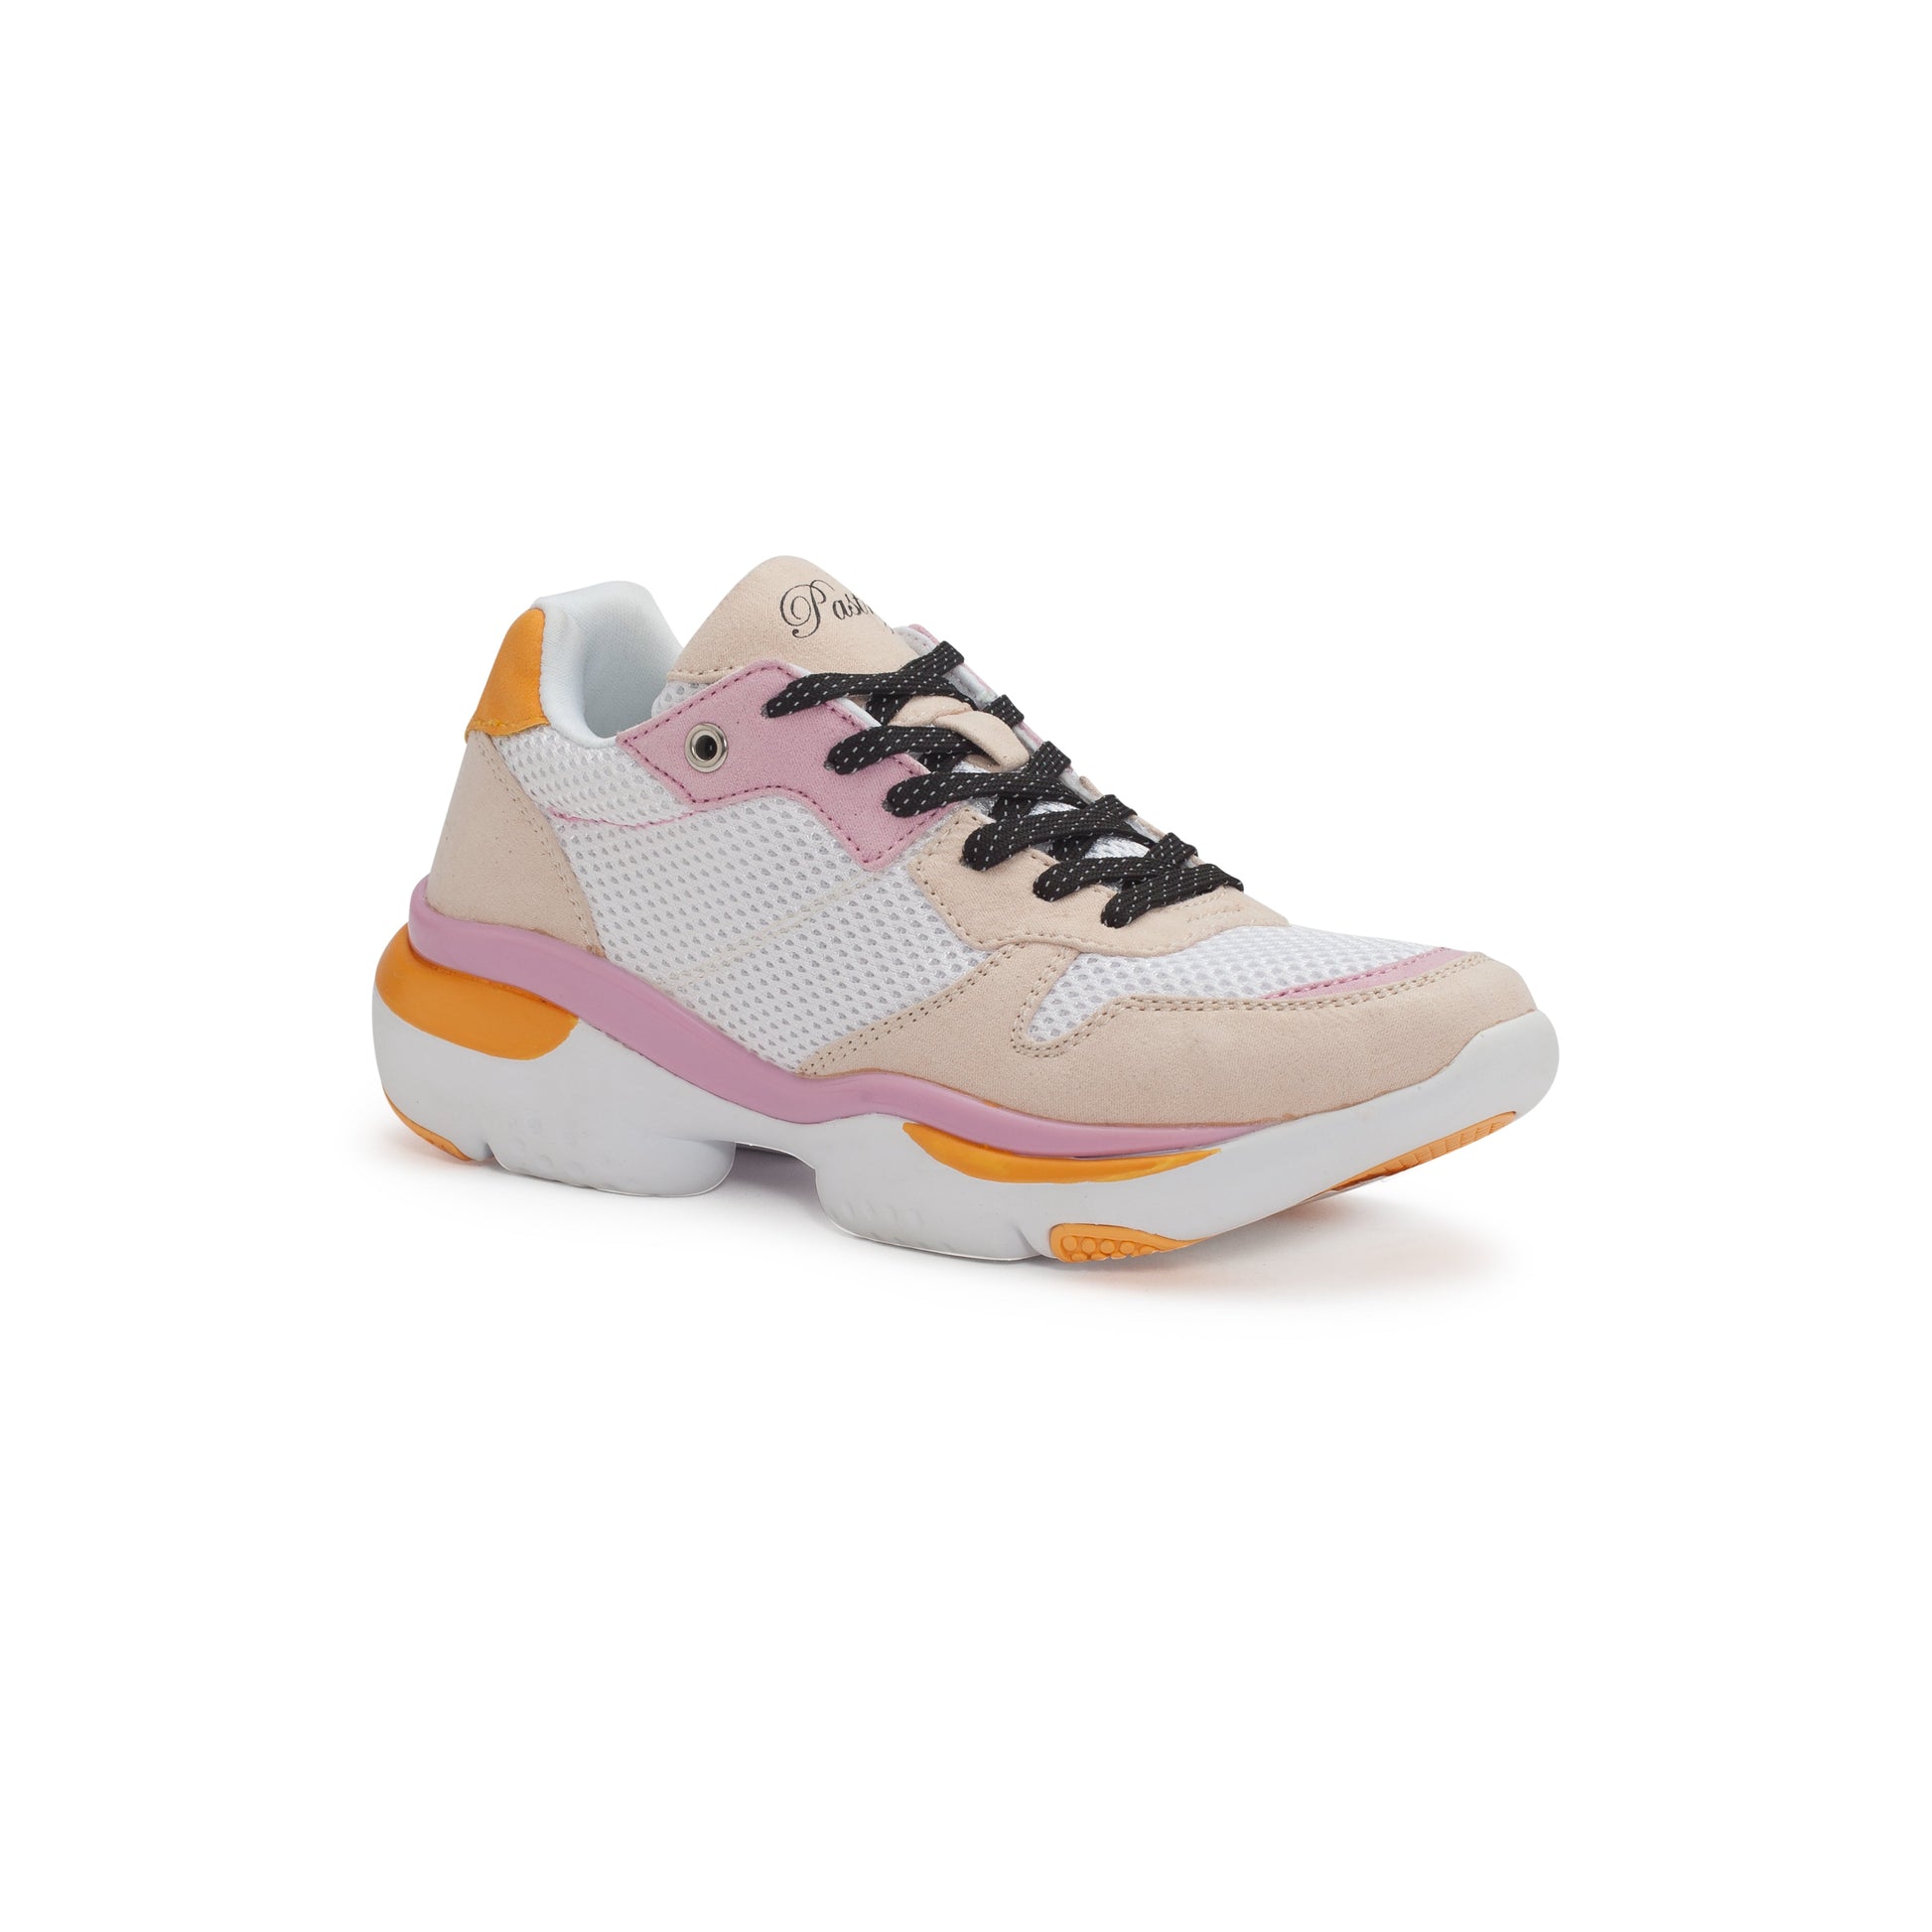 Pastry Adult Women's Carla Sneaker in White/Salmon/Pink in 3 quarter view